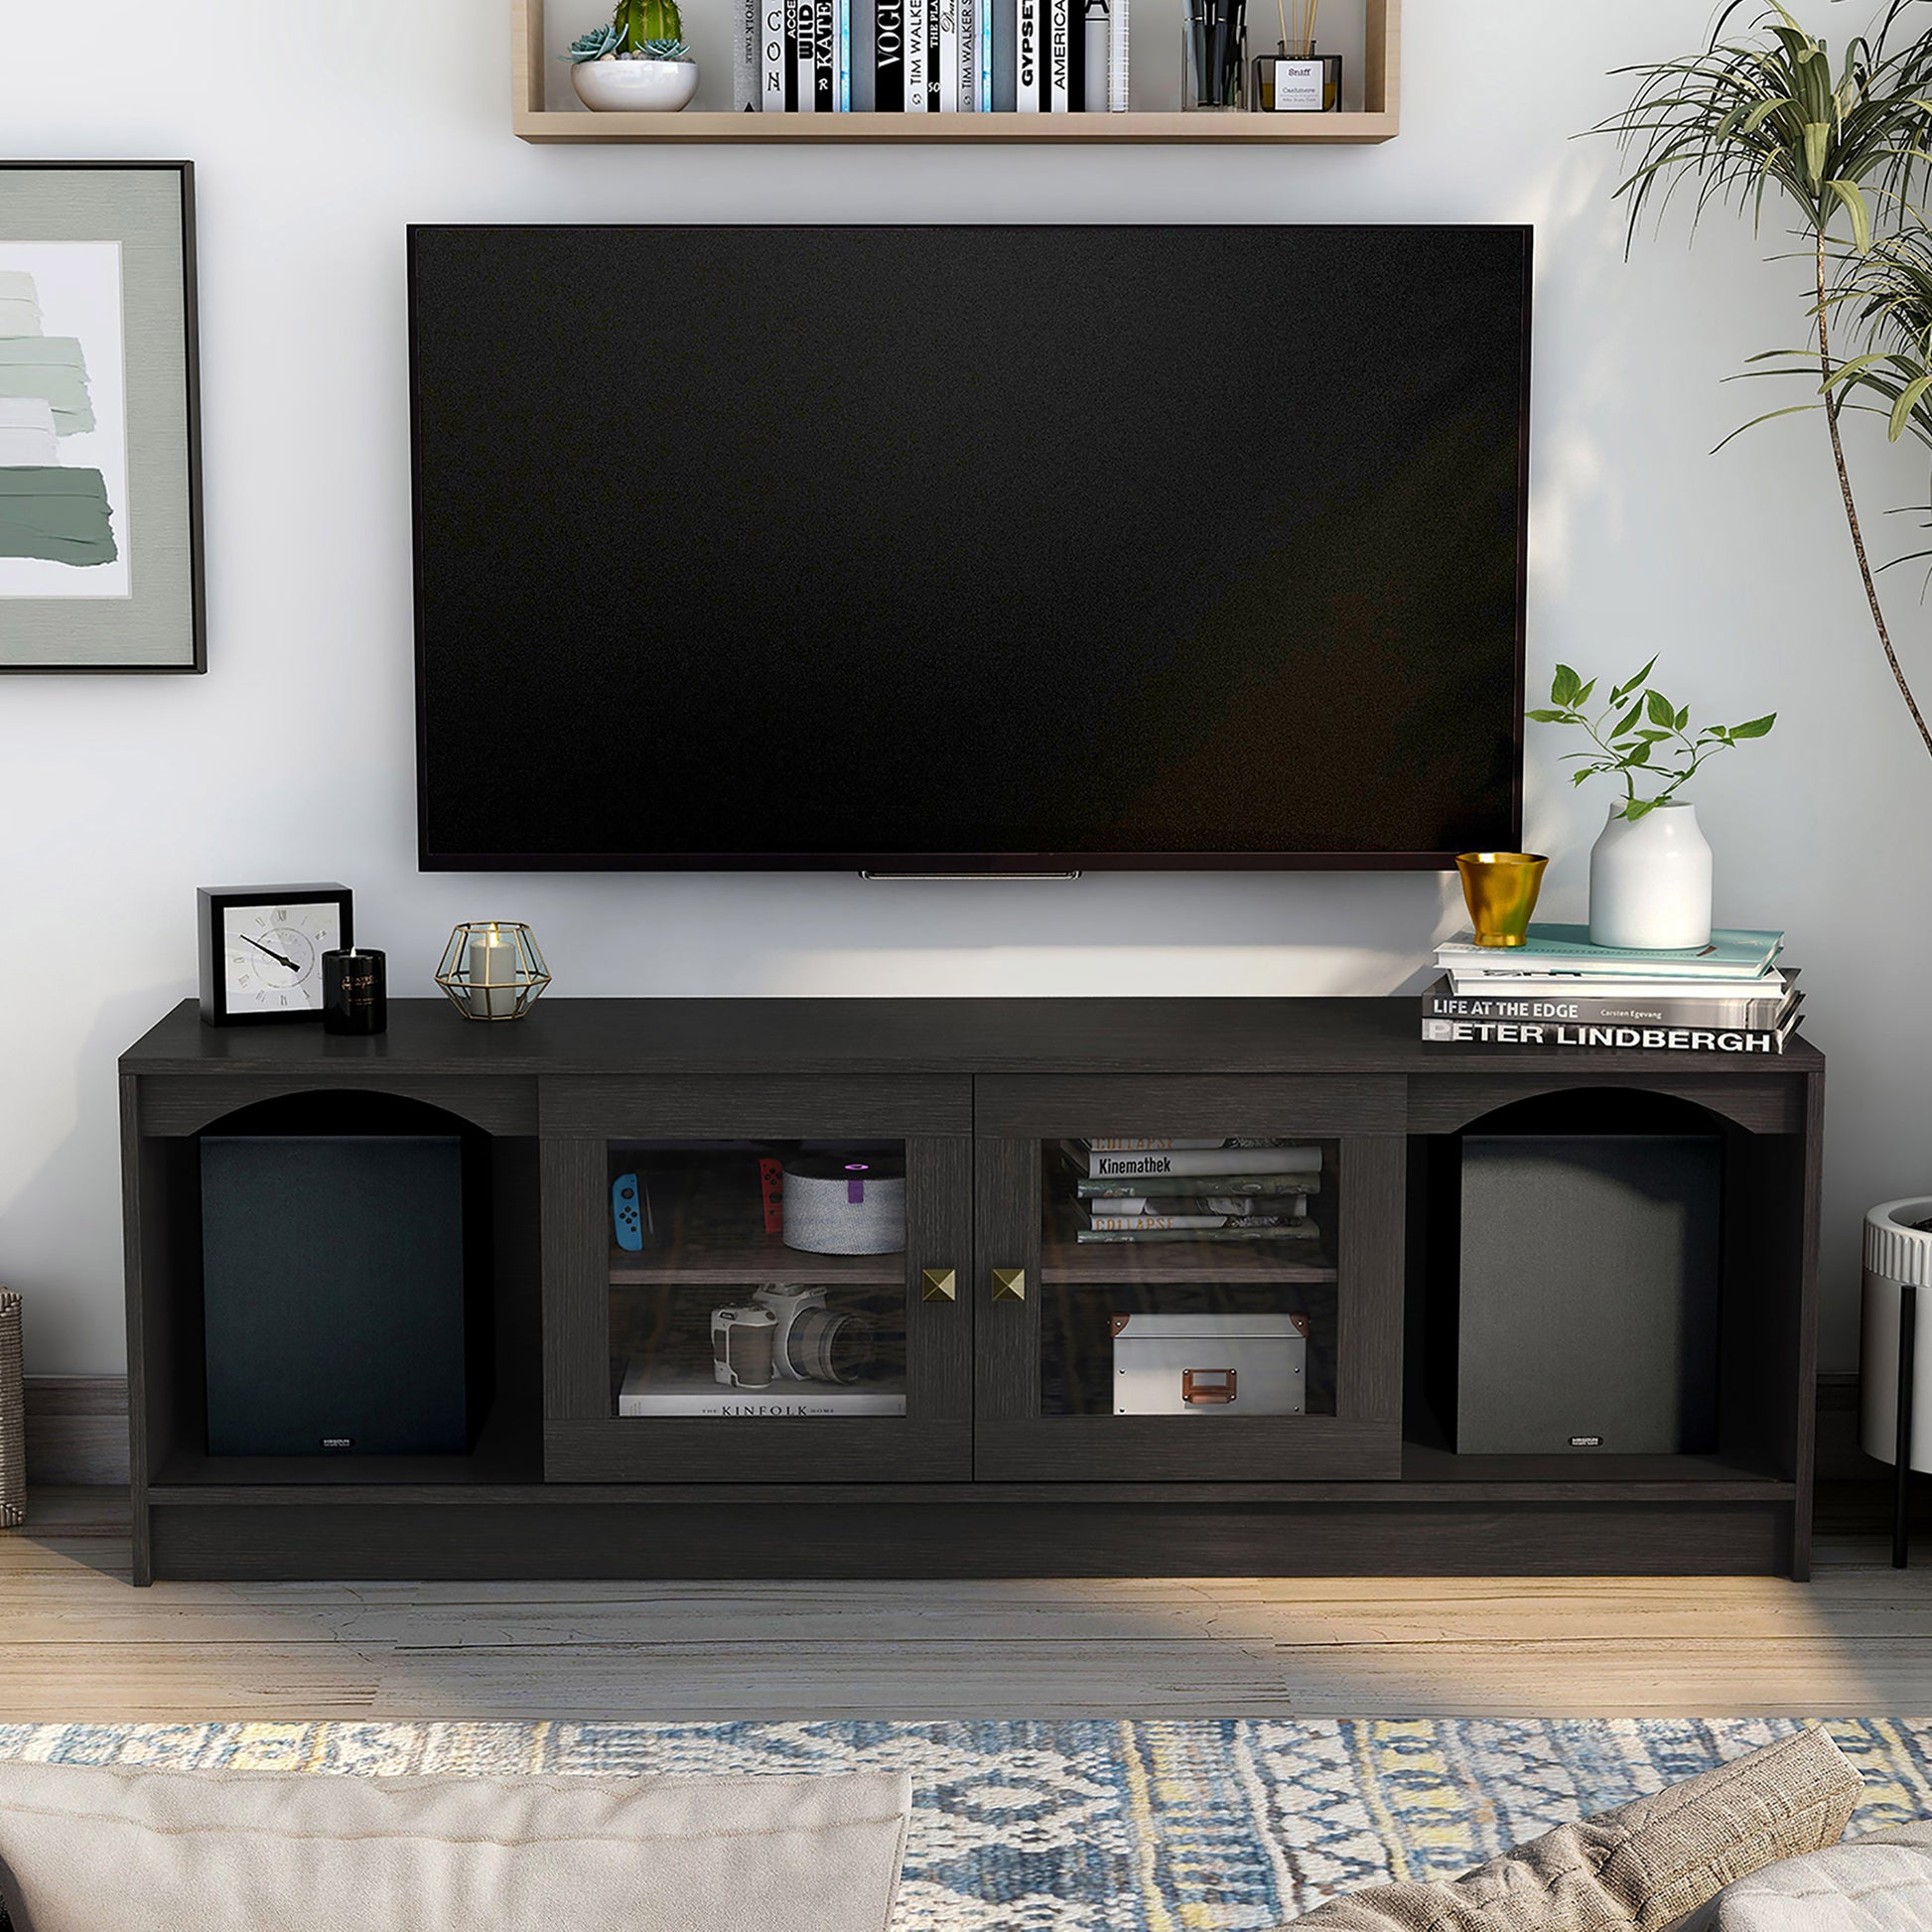 Front-facing transitional espresso two-sliding door TV stand in a living room with accessories